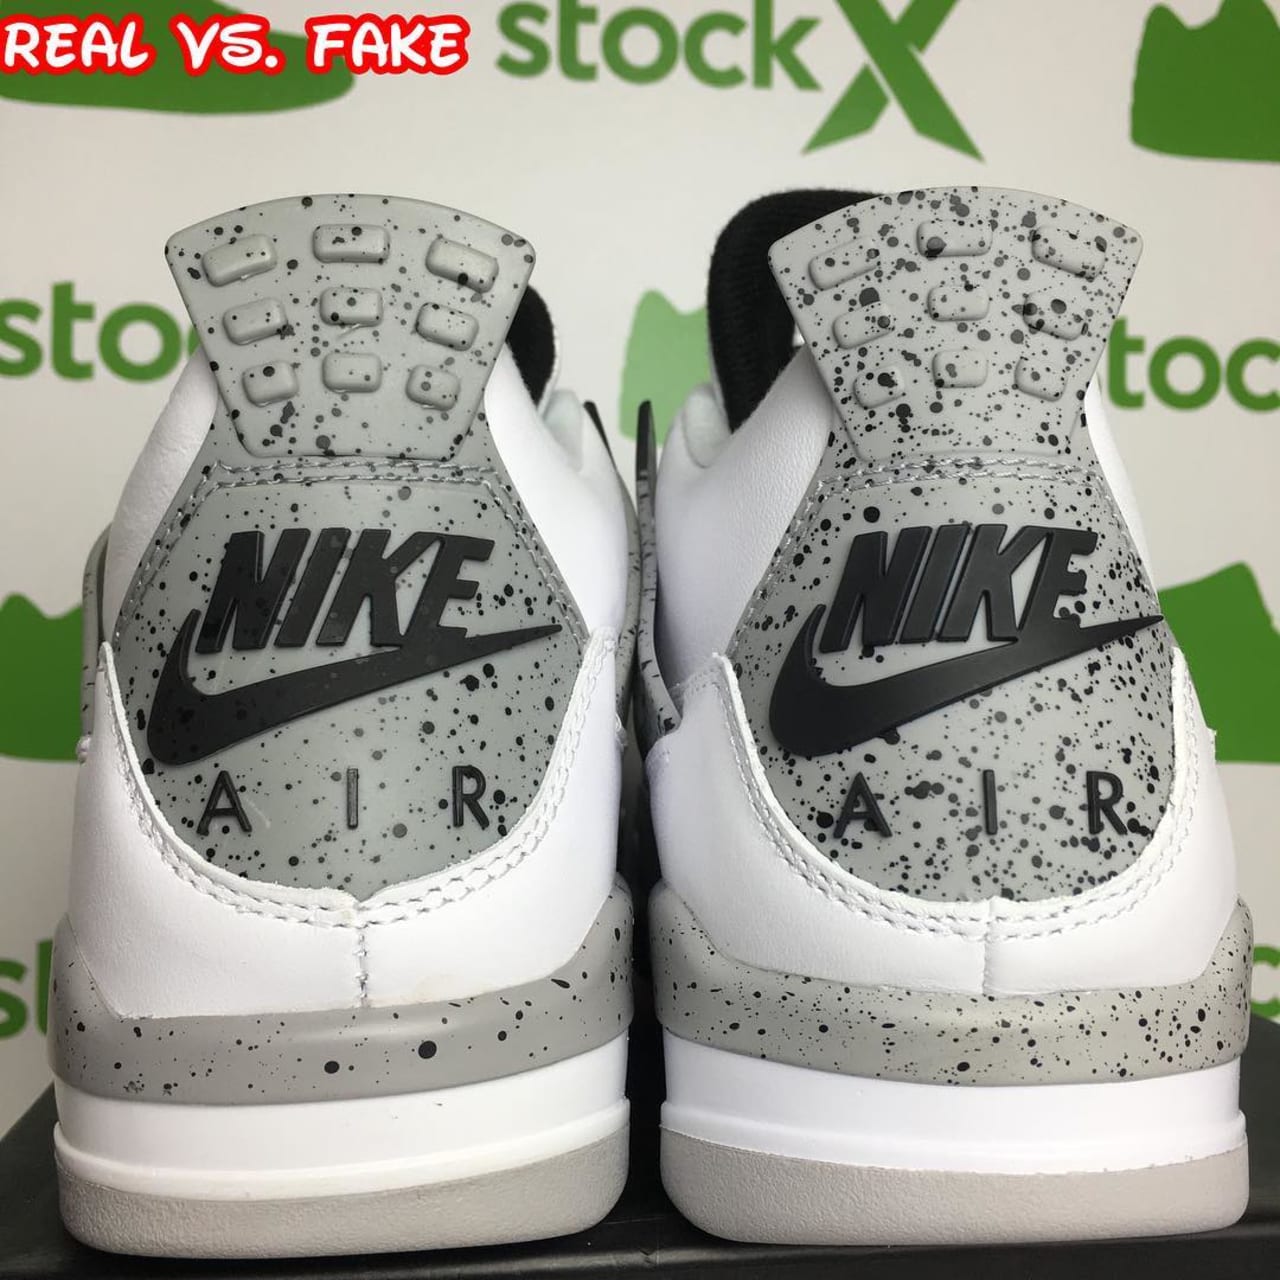 how to tell if jordan 4s are fake